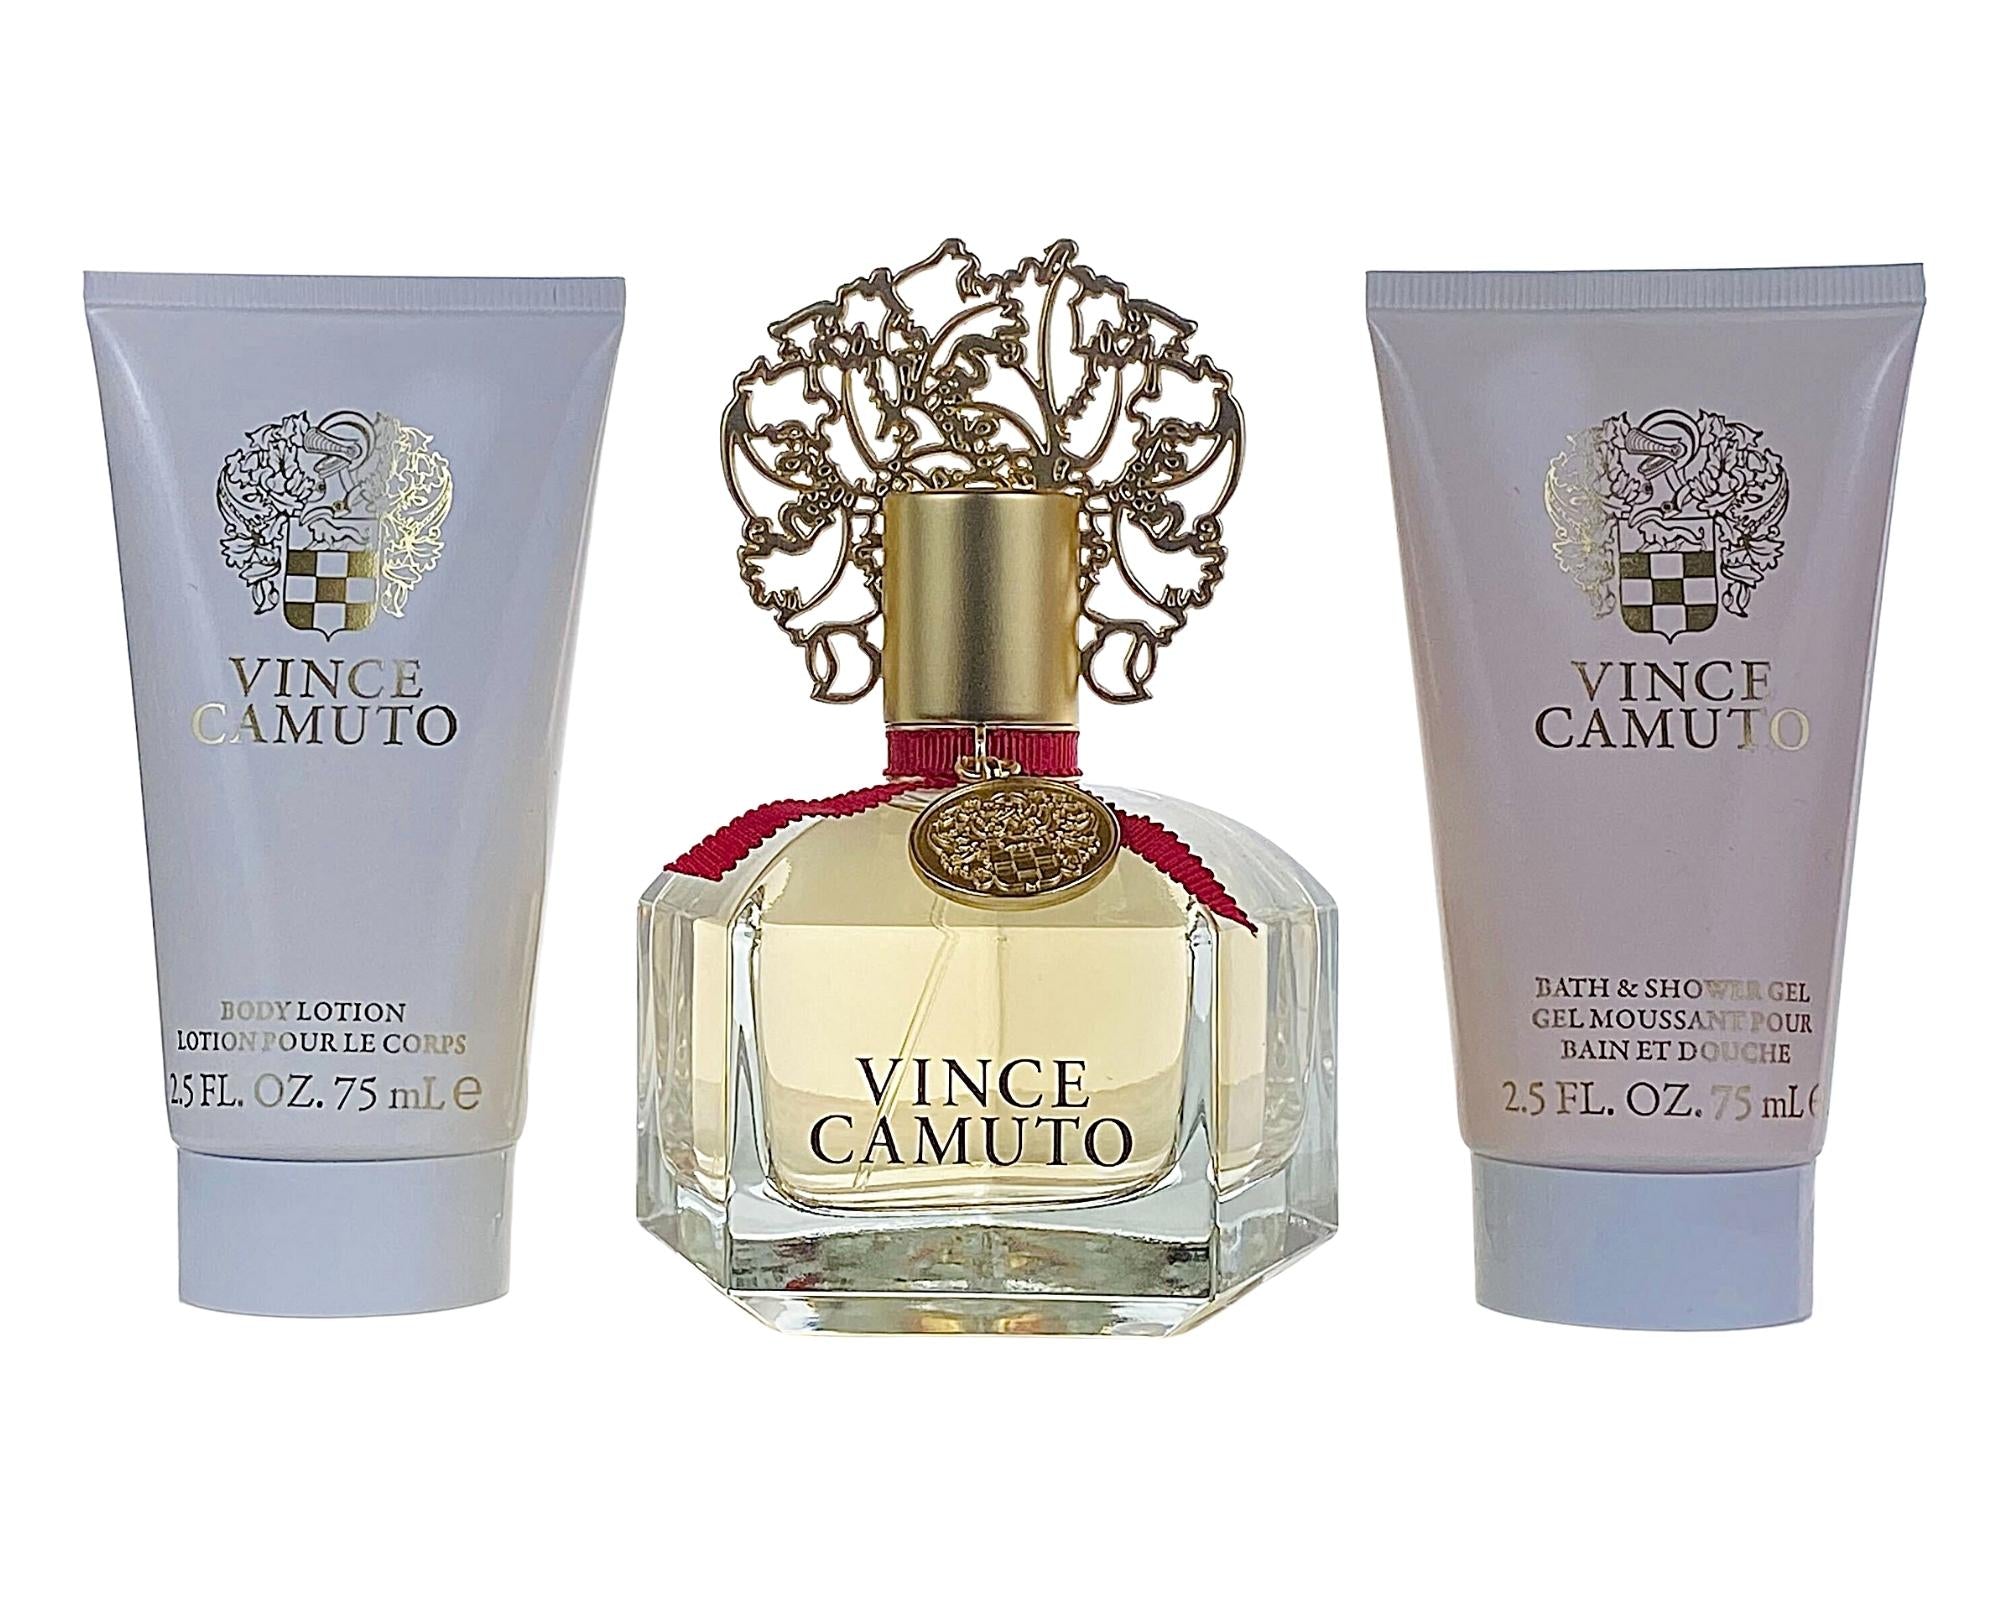 Vince Camuto 3 Pc. Gift Set by Vince Camuto for Women | 99Perfume.com